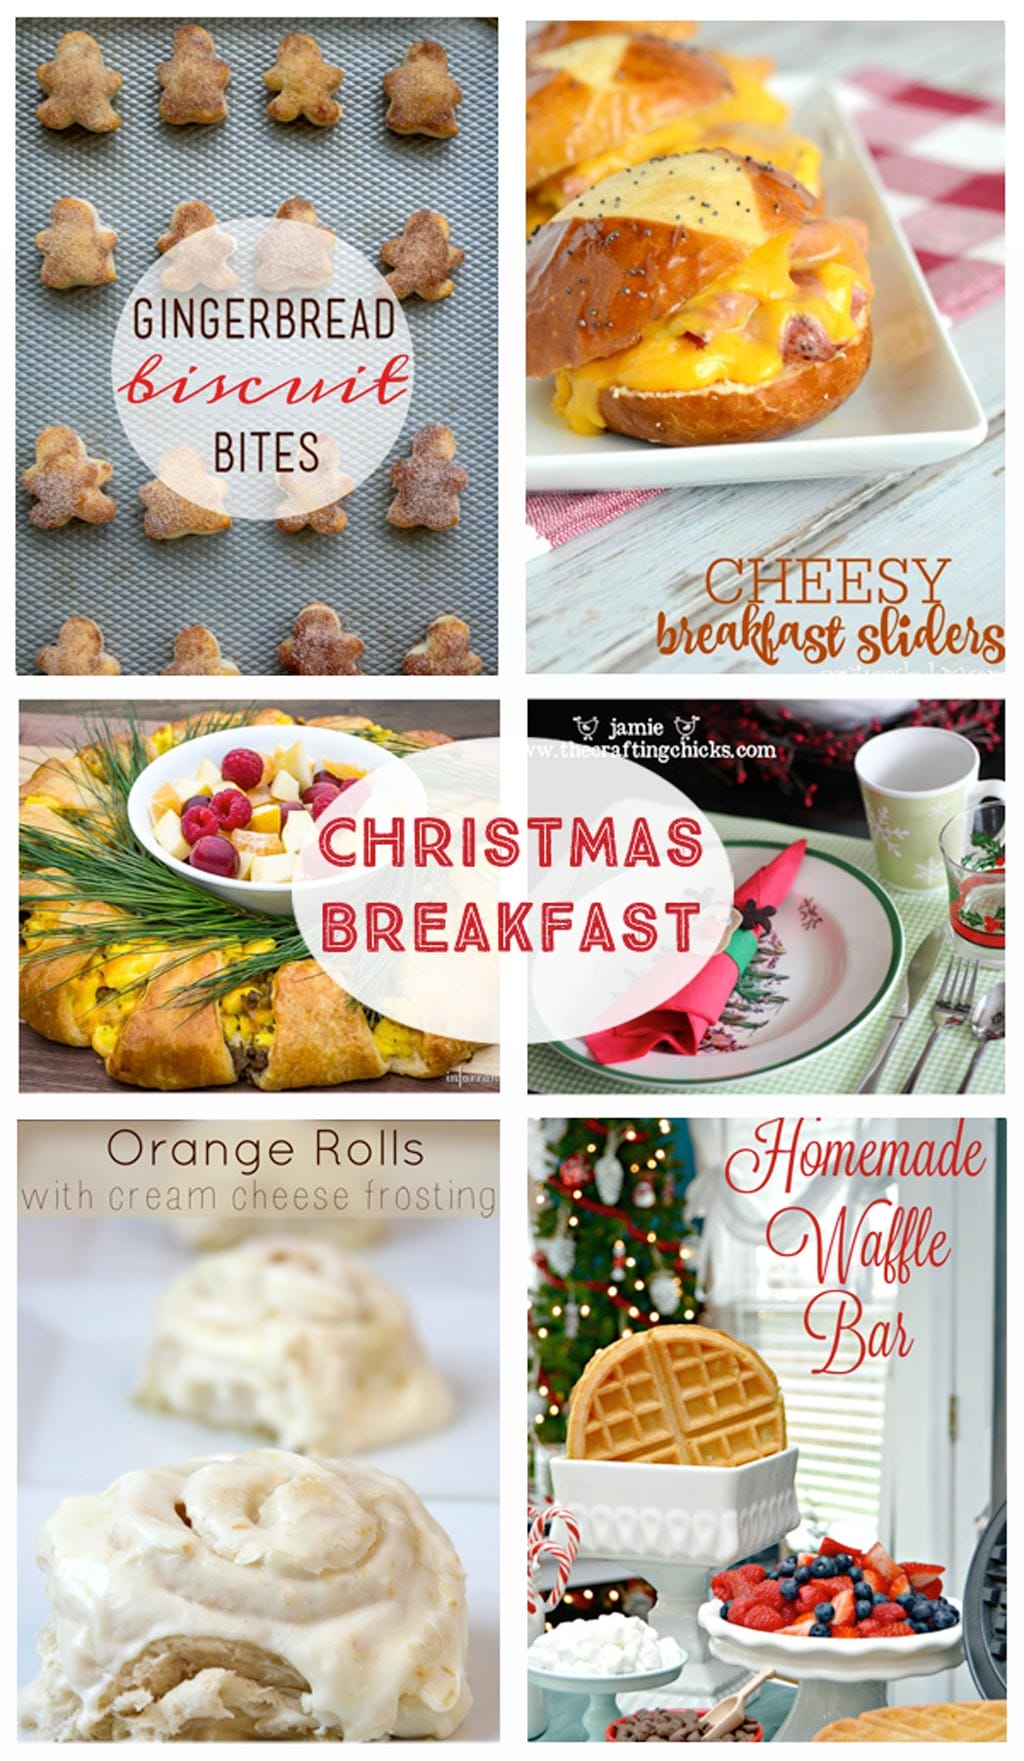 Christmas Breakfast - Yummy recipes for Christmas morning.  Casseroles, sliders, pancakes, french toast, waffle bar, biscuits, and cinnamon rolls.